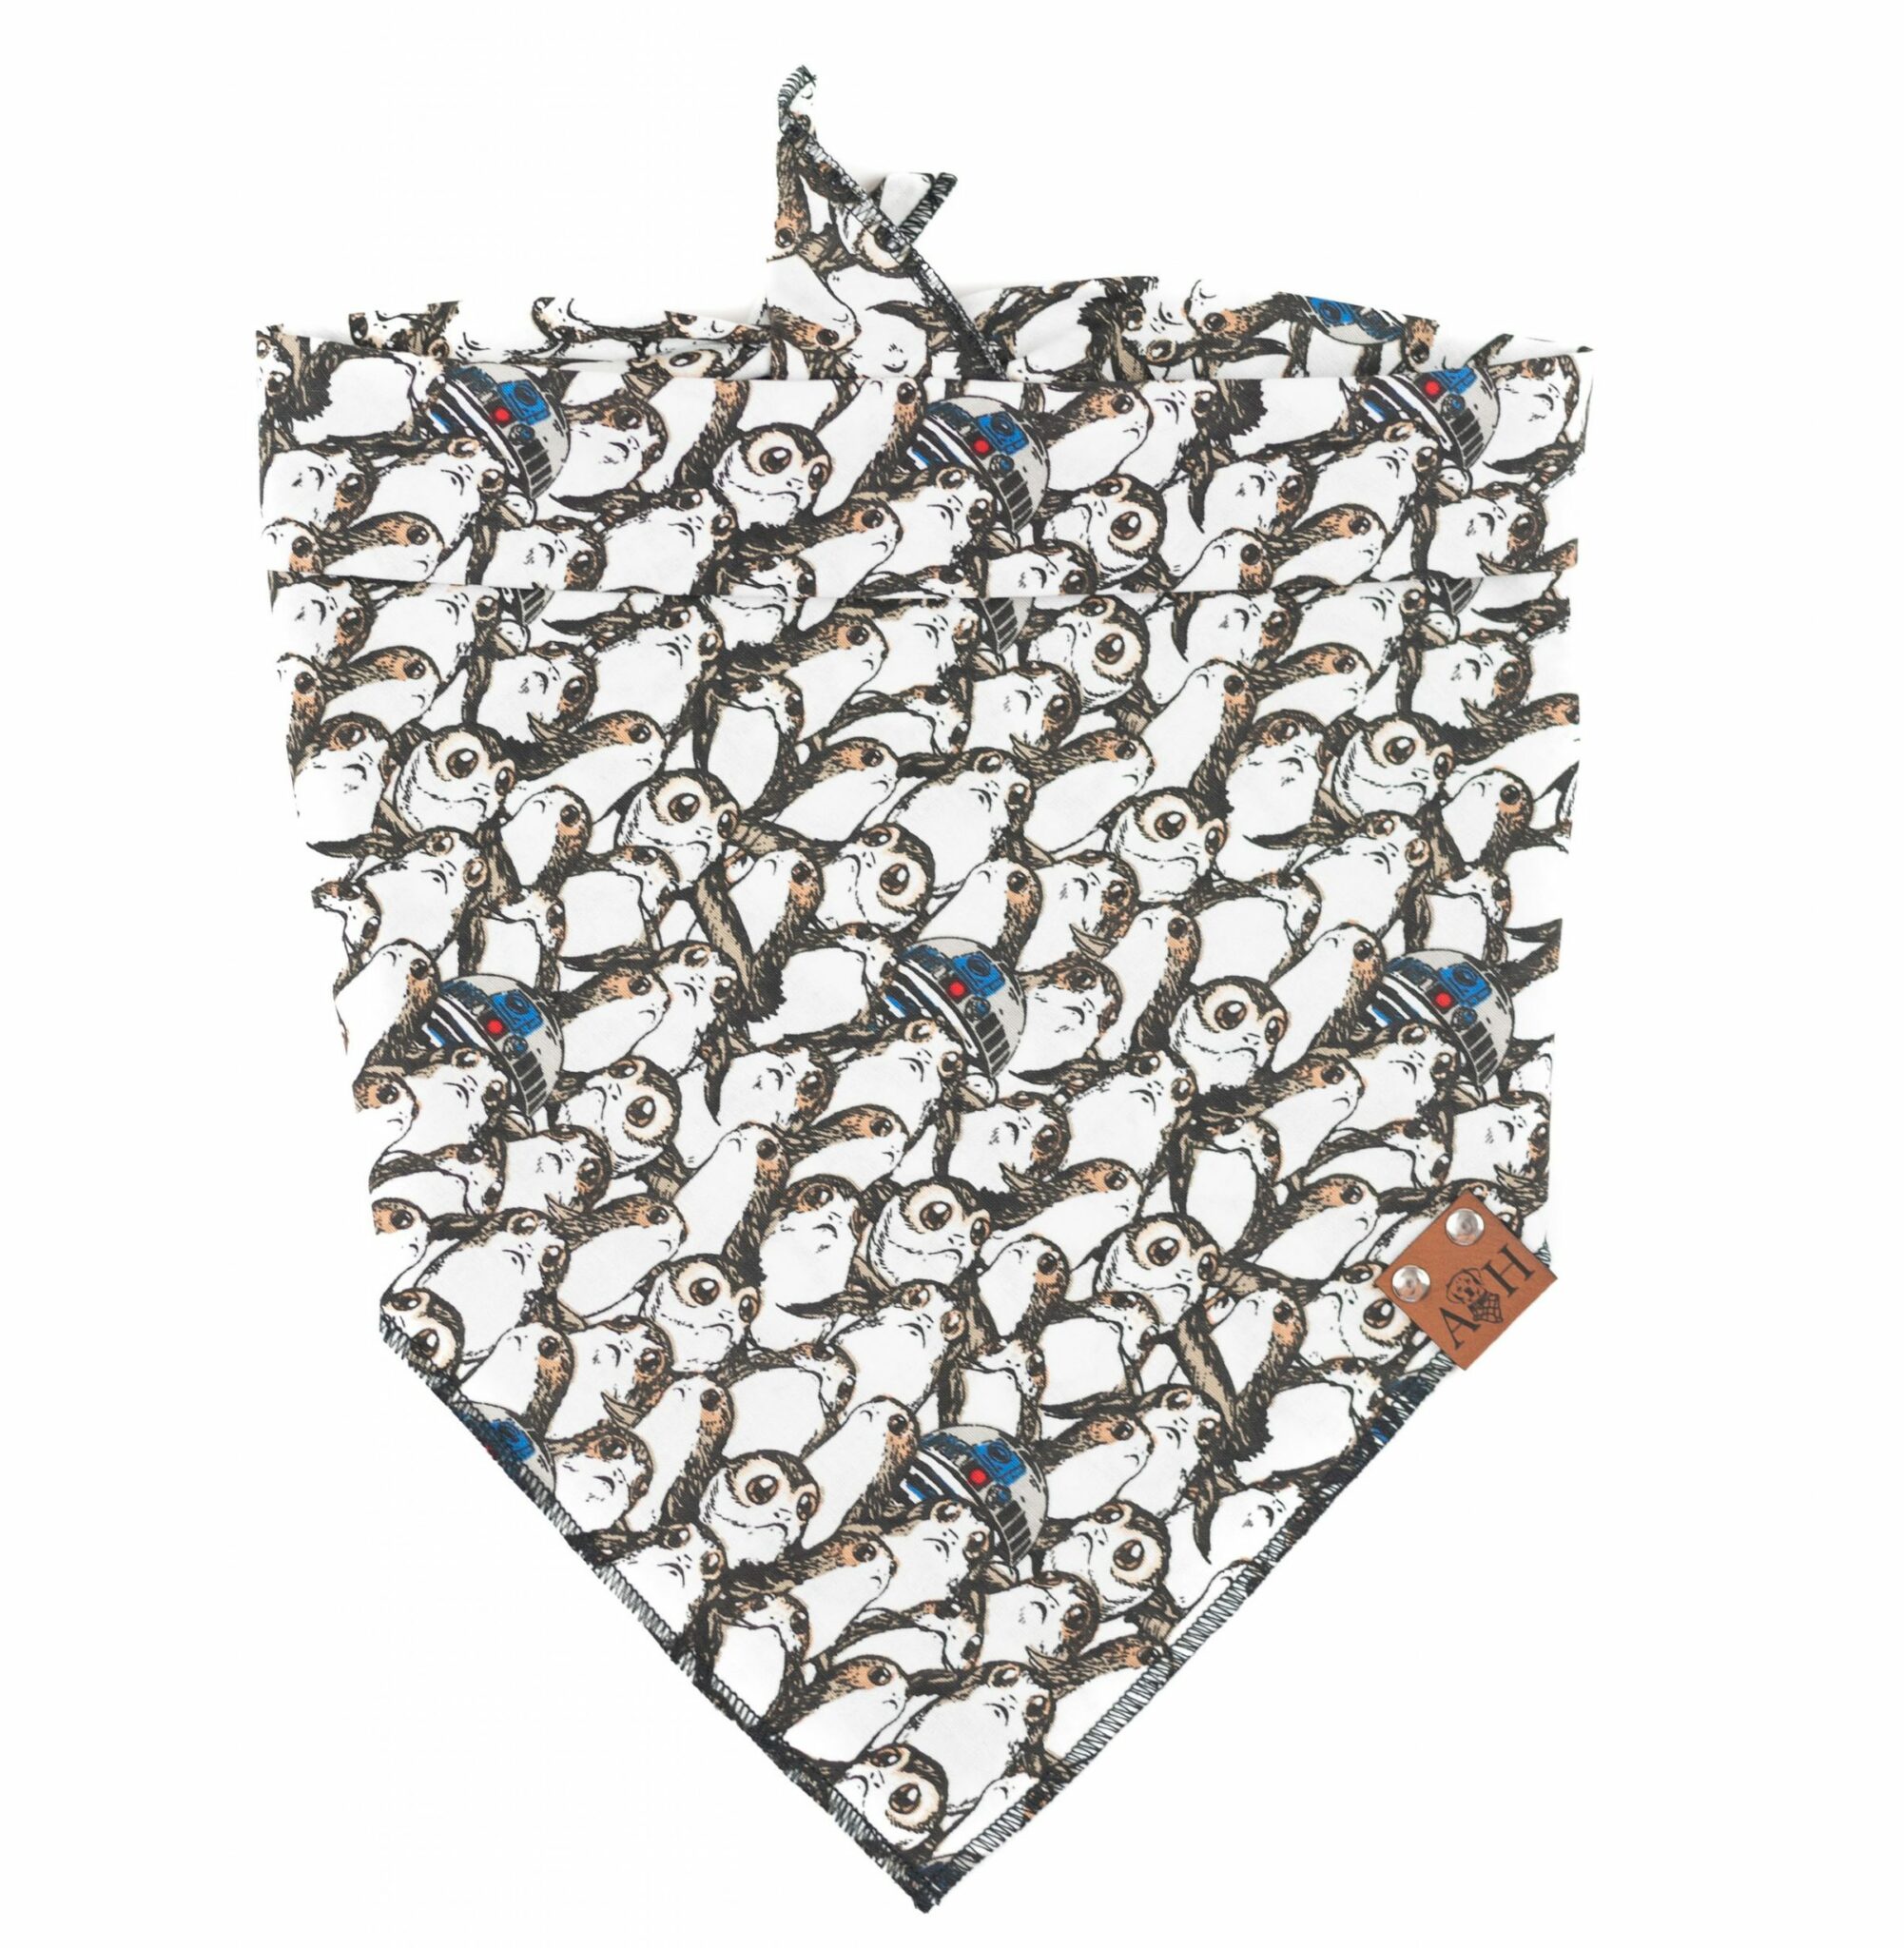 Porg Bandana with grey, brown and white Star Wars porg characters